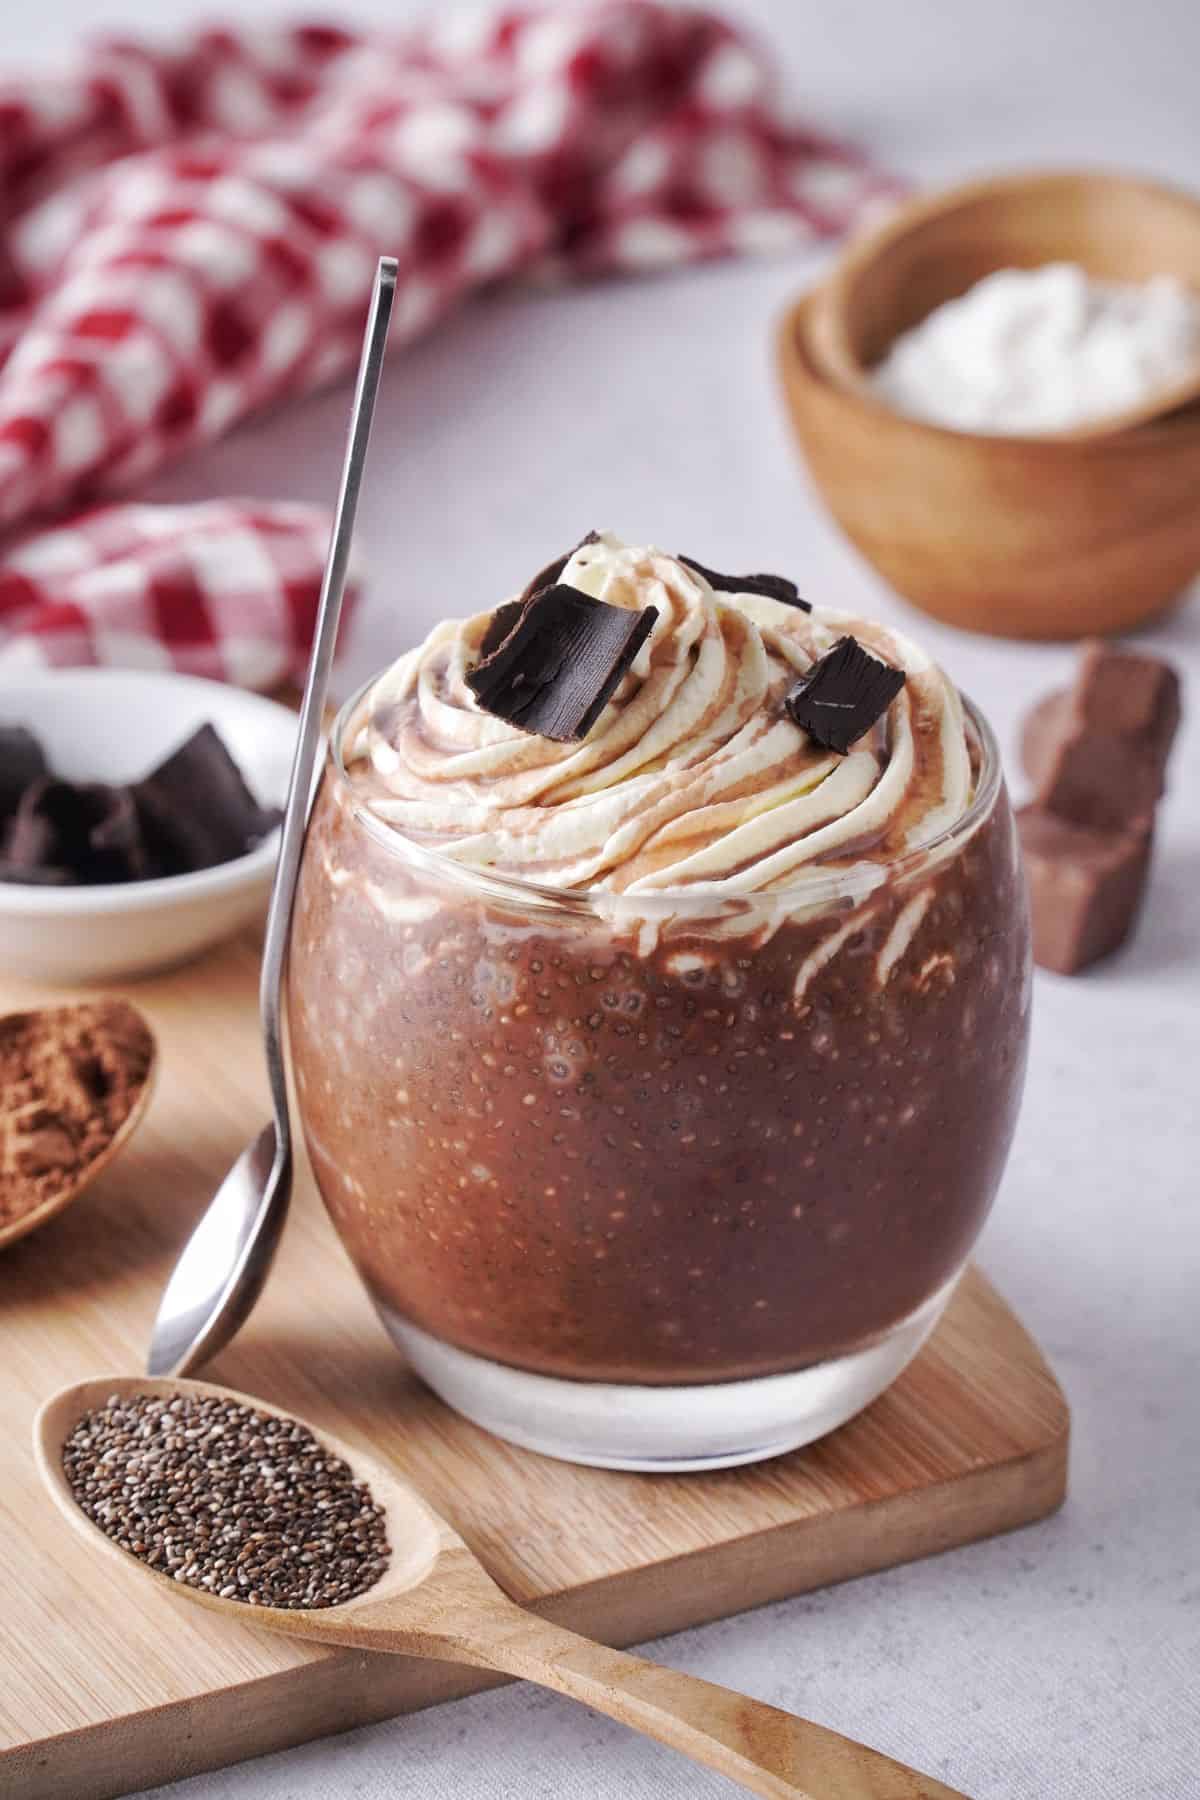 Chocolate Chia Seed Pudding keto topped with dark chocolate and whipped cream